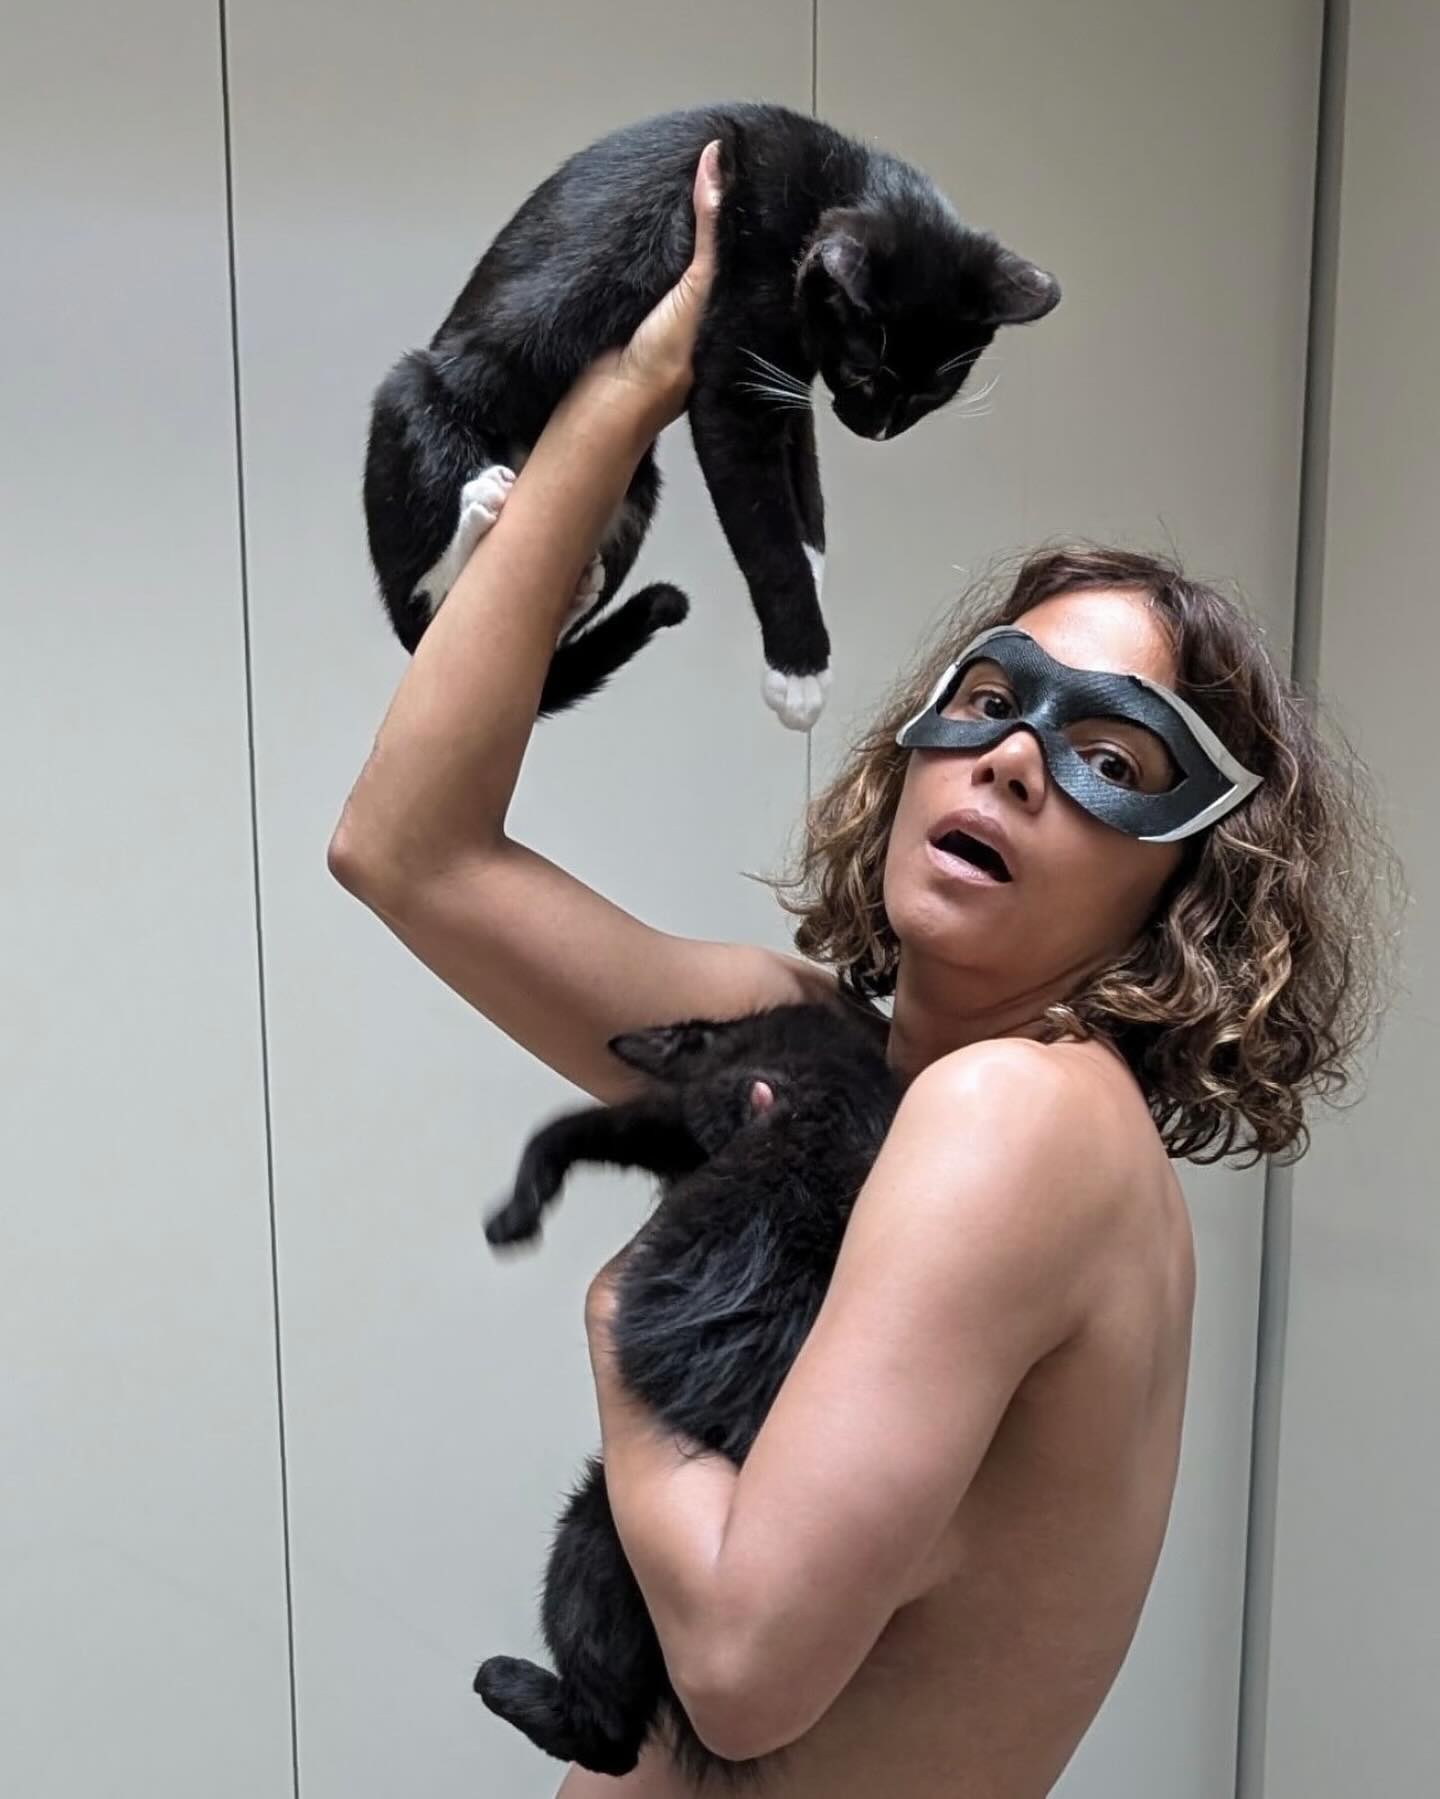 In the snaps, the “Gothika” star ditched her top, wearing only black underwear and a black cat eye mask.